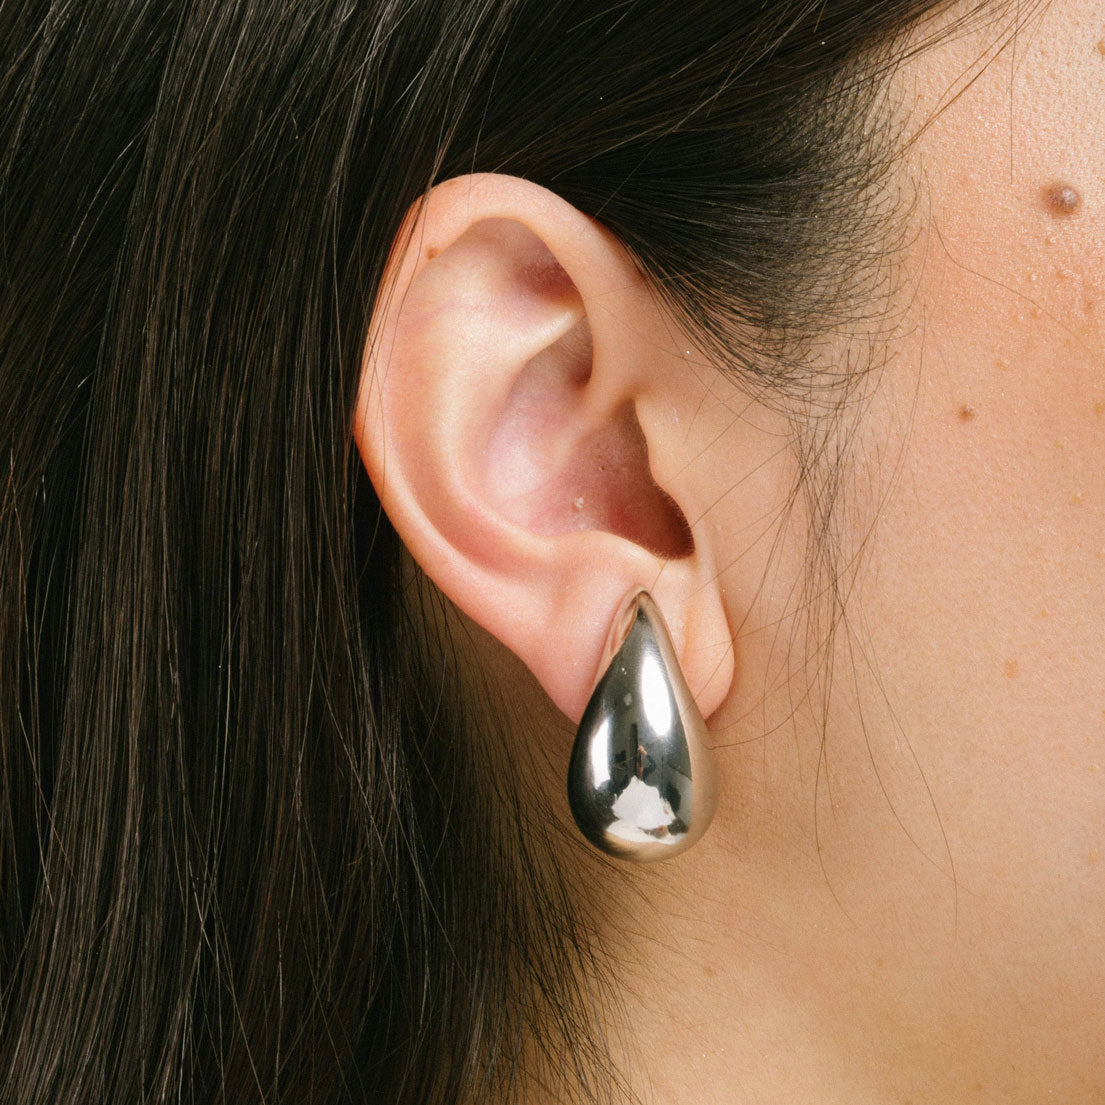 A model wearing the Isla Clip On Earrings in Silver feature a screwback closure that makes them suitable for all ear types, providing a secure hold for up to 12 hours. Easily adjustable, these earrings are constructed with a silver toned copper alloy. Please note: this item is sold as one pair.